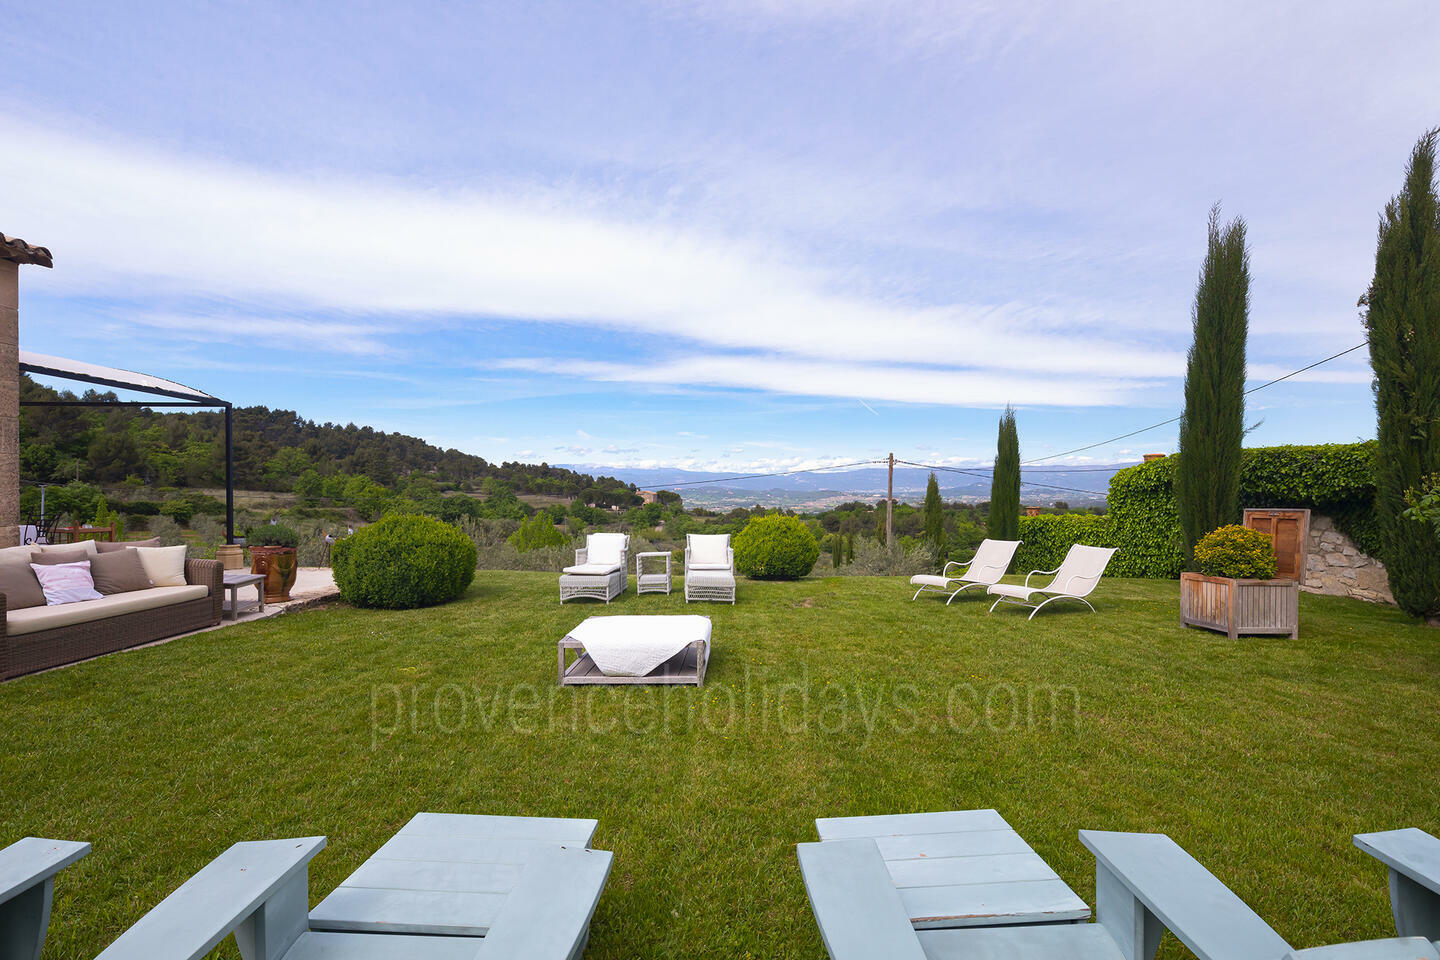 15 - Outstanding Property with Wonderful Views of the Luberon: Villa: Exterior